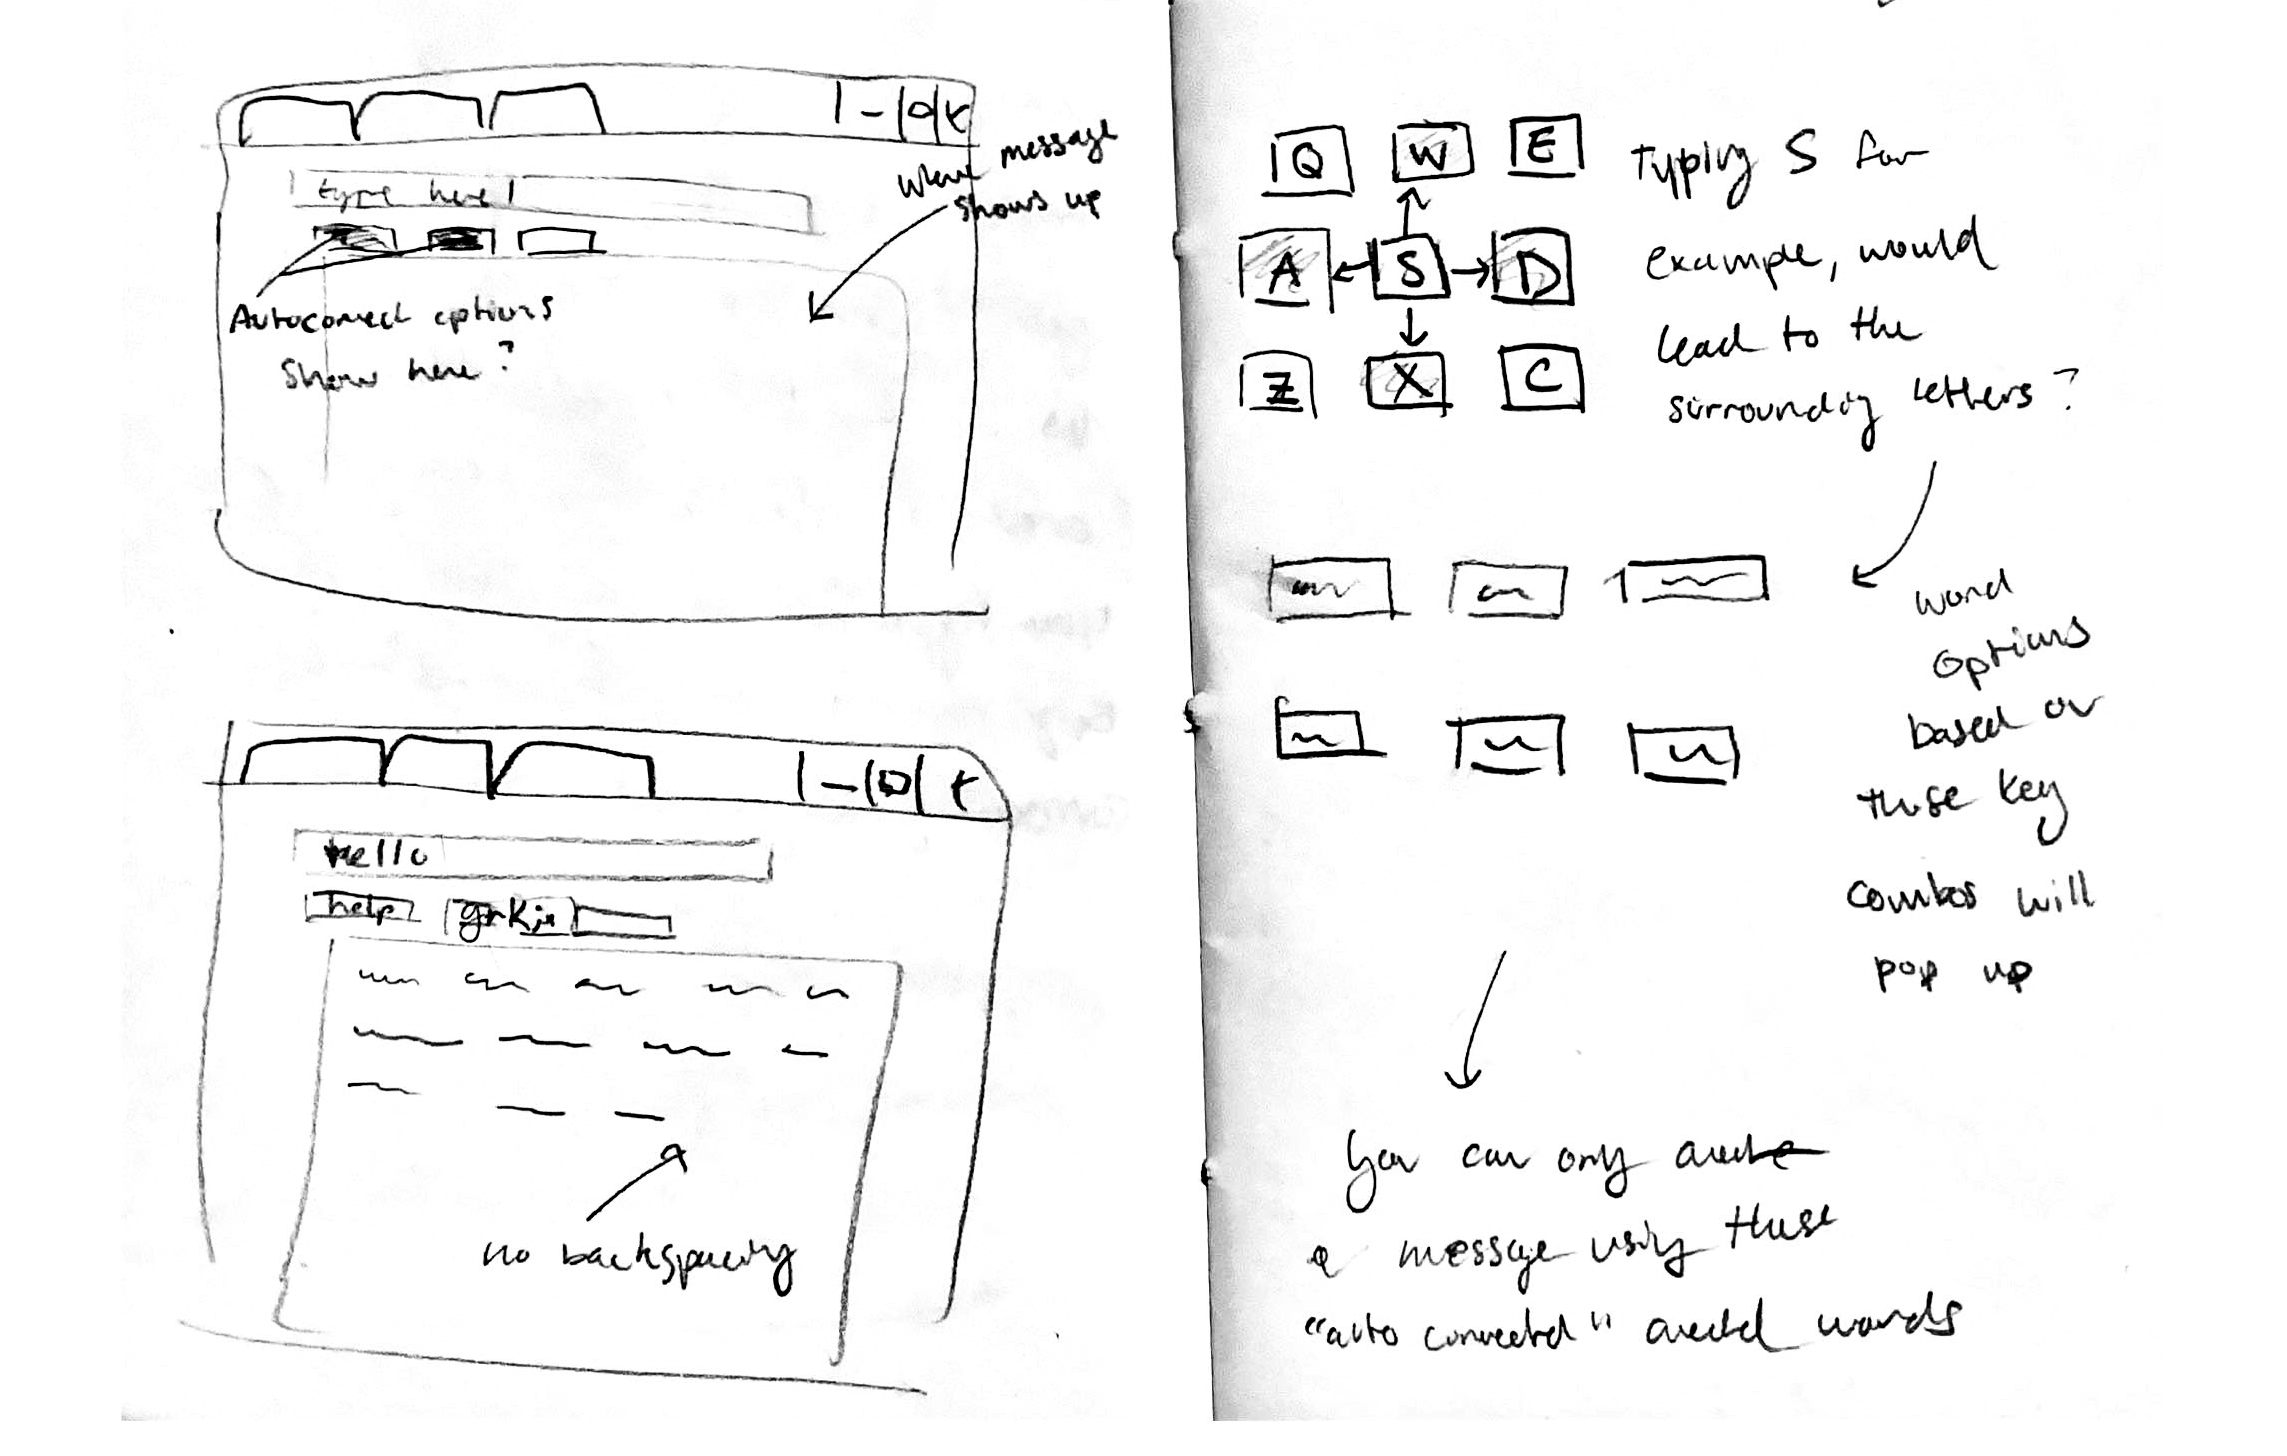 scan of reading response with small sketches depicting a useless website concept and explanation of how it works